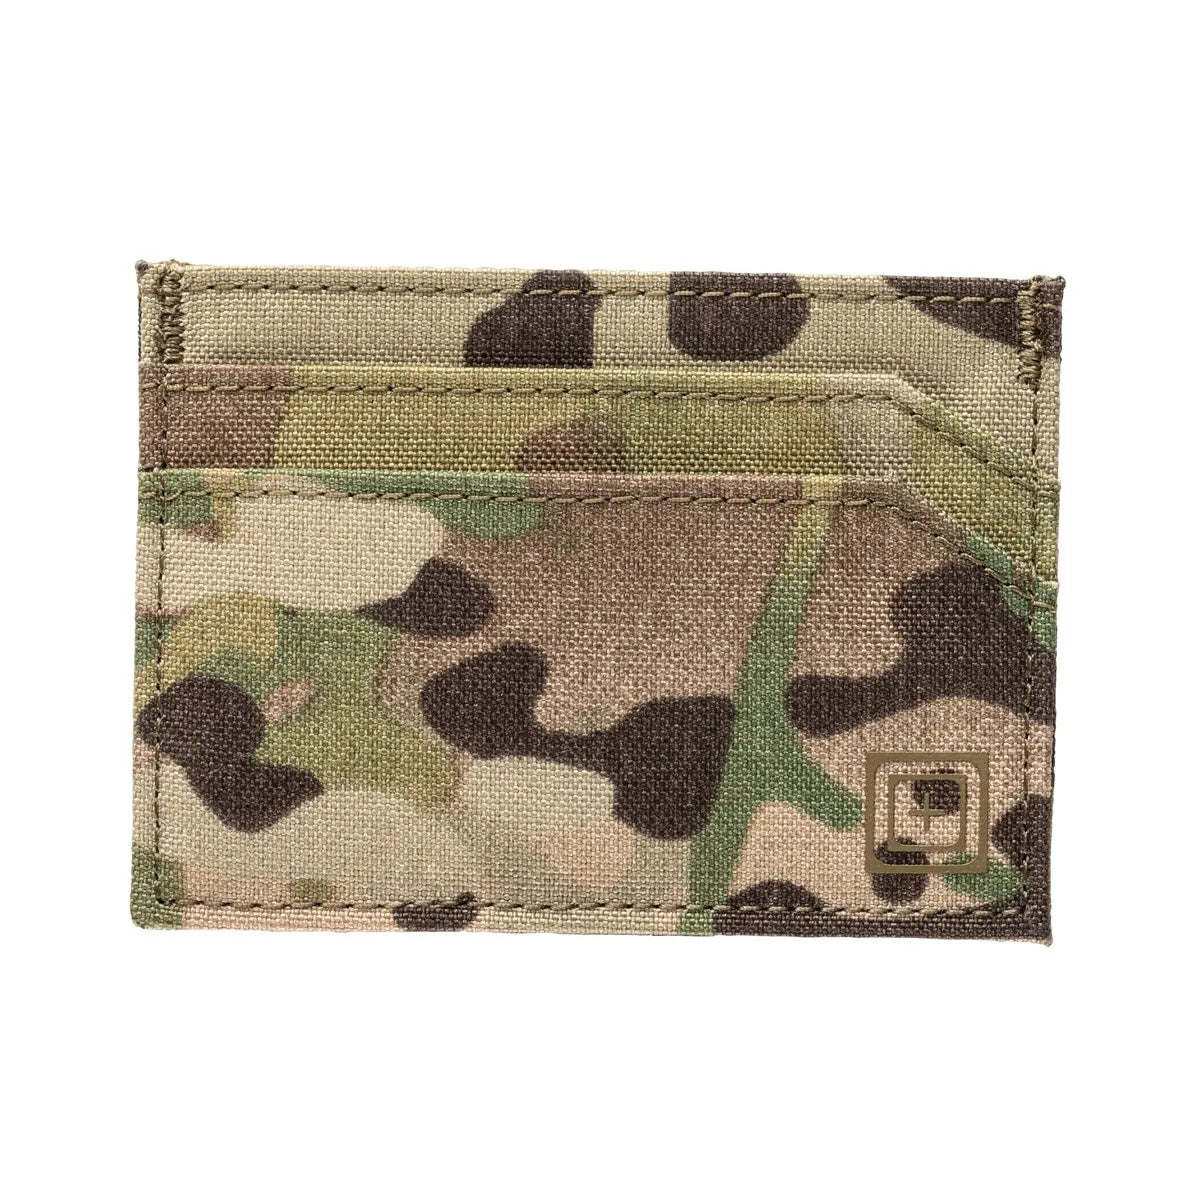 5.11 Tactical - TRACKER CARD WALLET 2.0